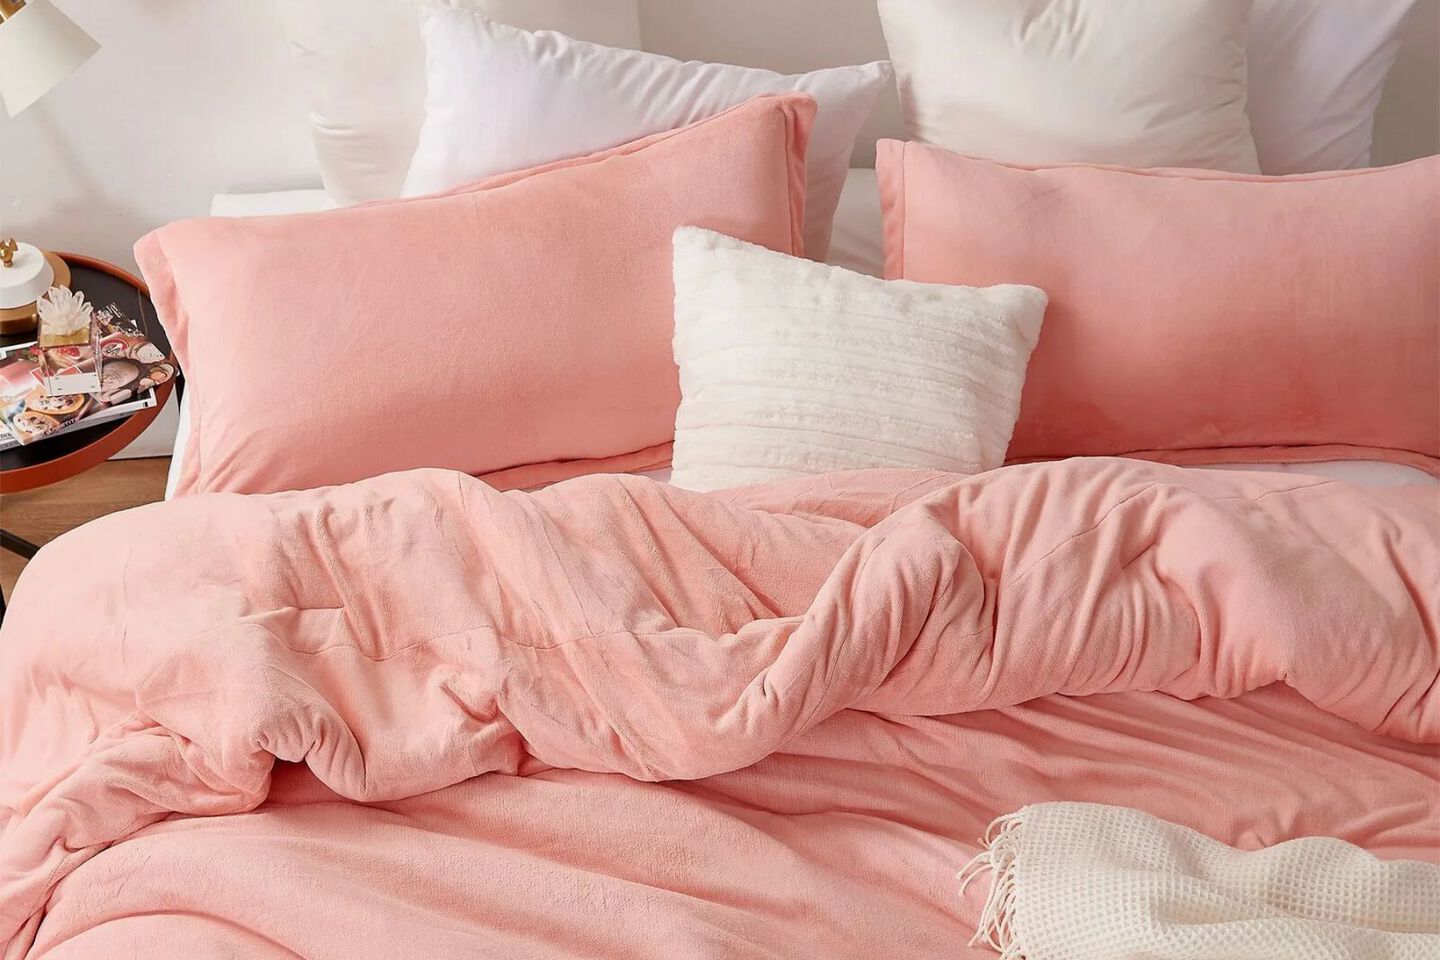 Bed with a peach-colored comforter and peach and white pillows